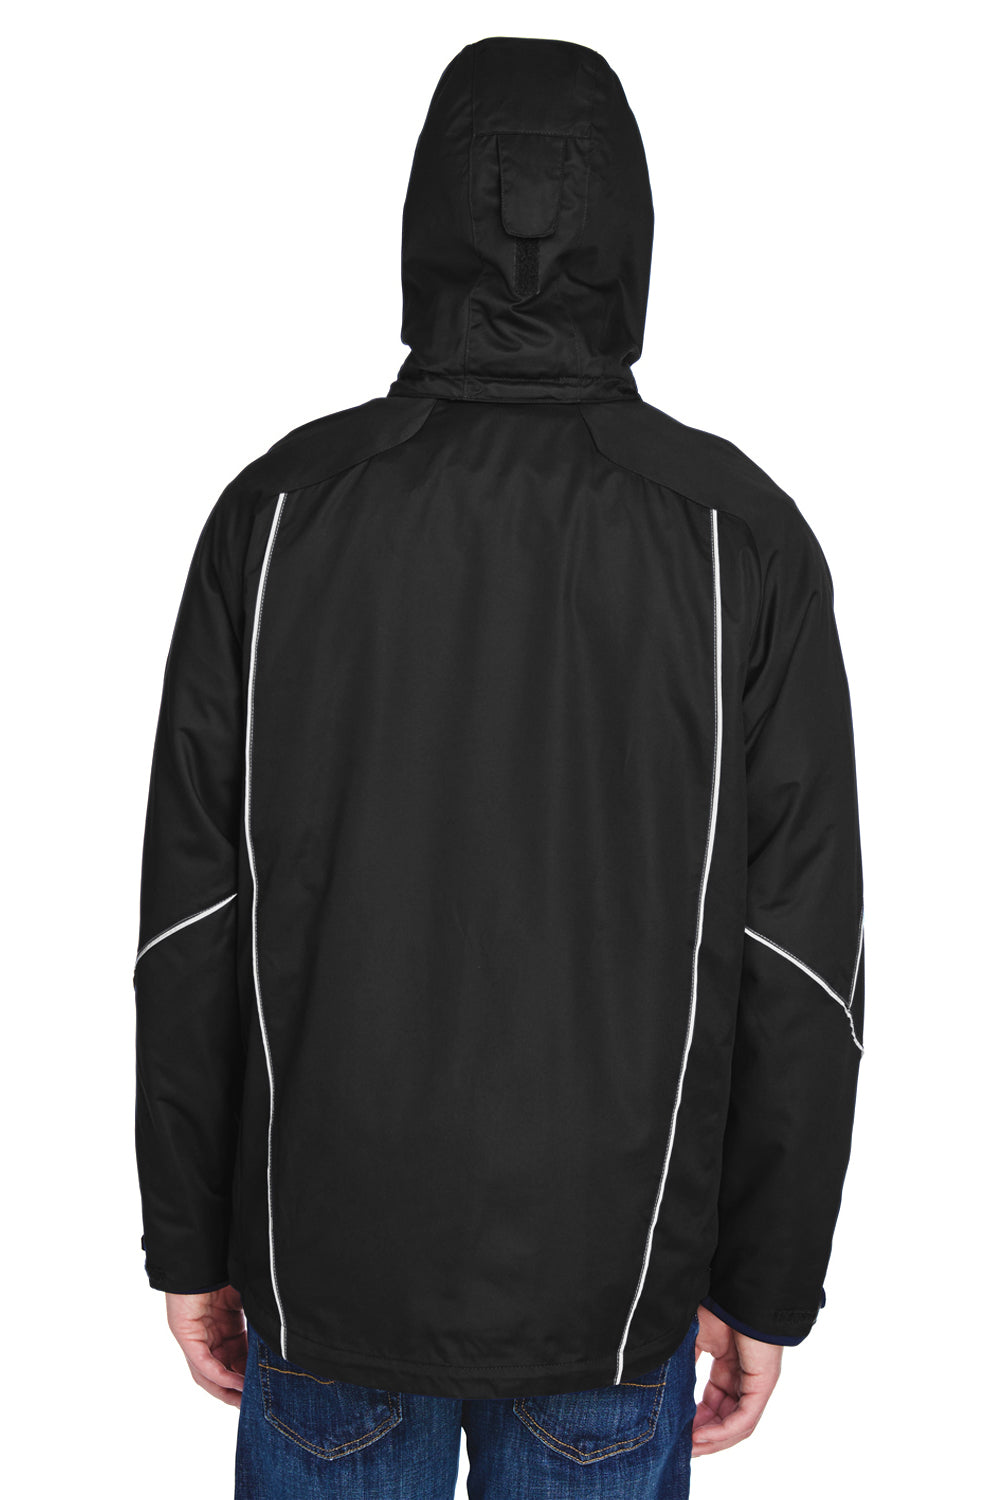 North End 88196 Mens Angle 3-in-1 Full Zip Hooded Jacket Black Back